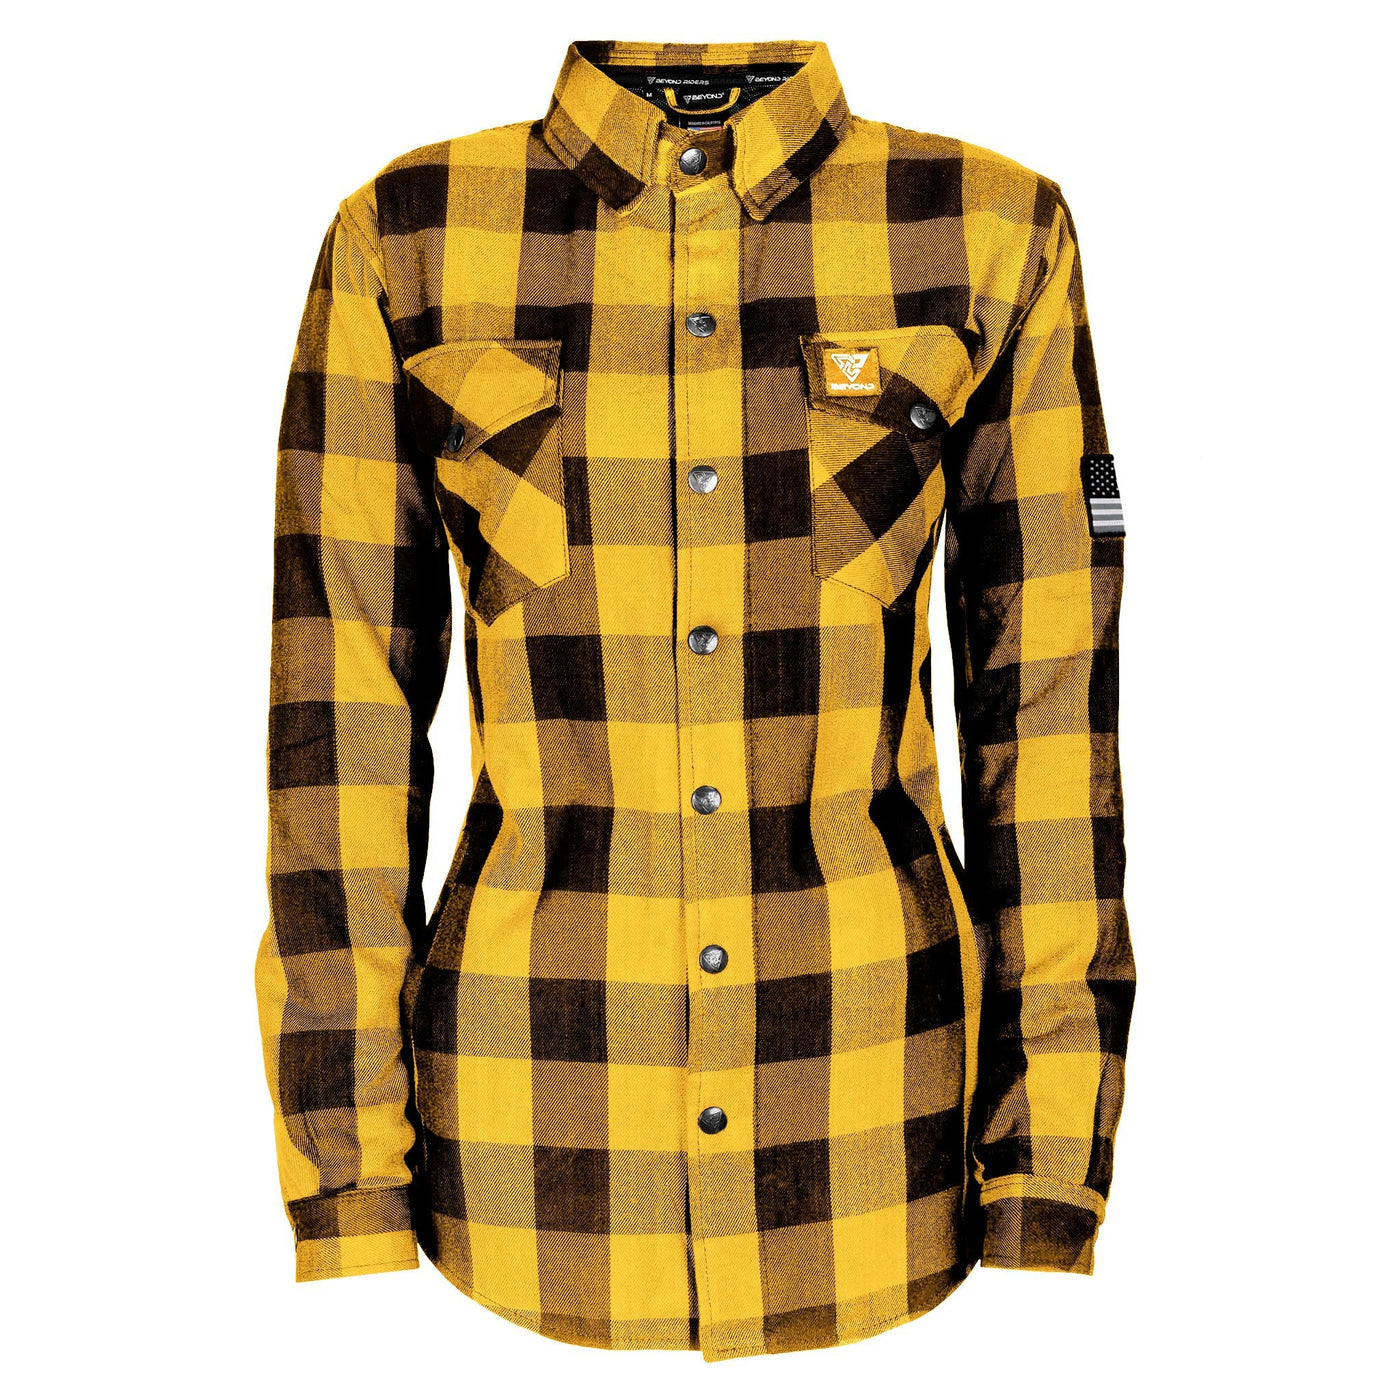 Protective Flannel Shirt with Pads for Women - Yellow and Black Checkered